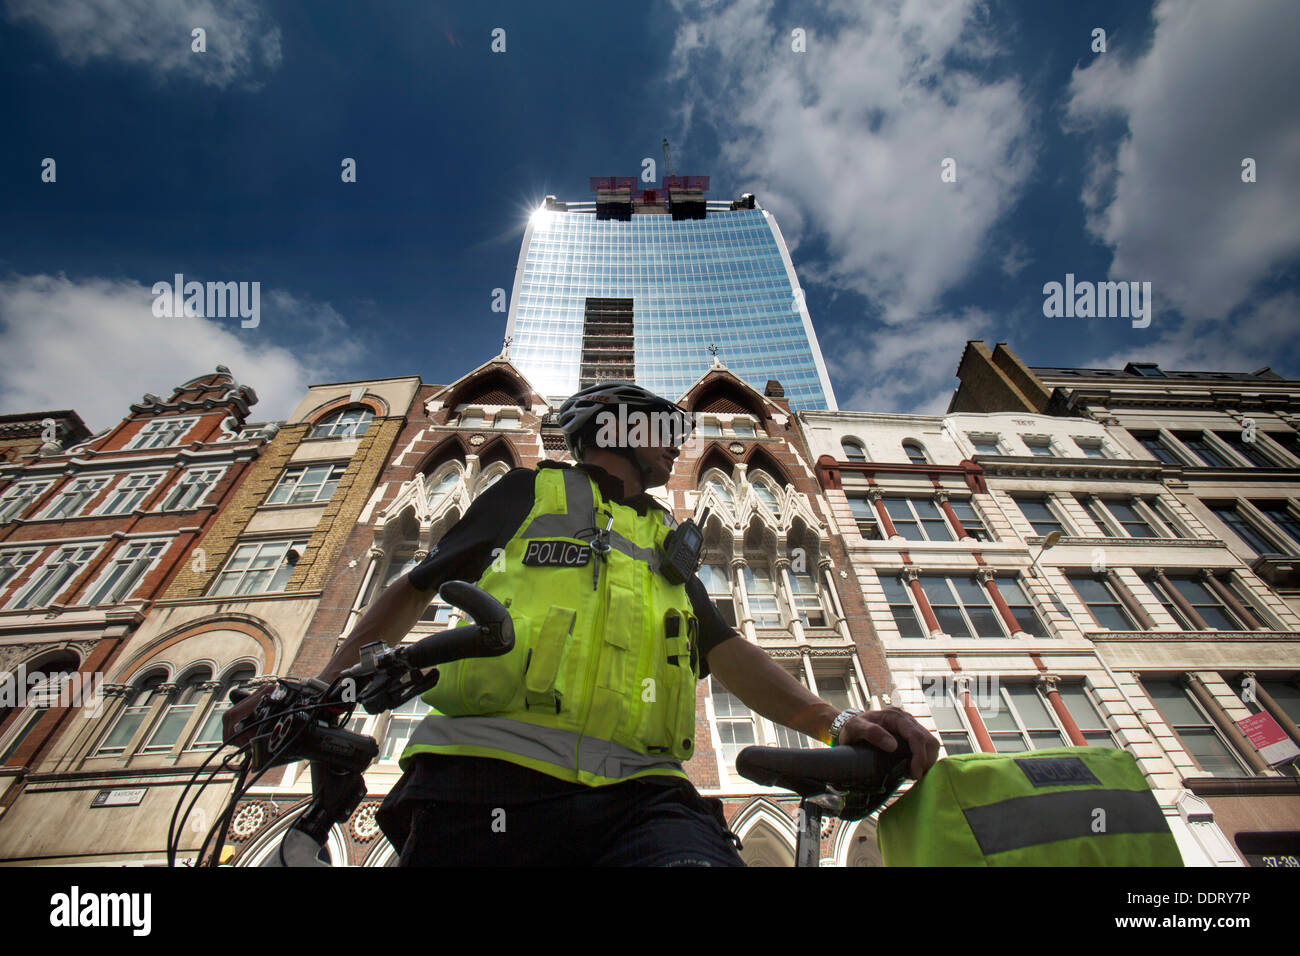 Walkie Talkie building in London that caused heat spot from concentric design policeman on bicycle Stock Photo